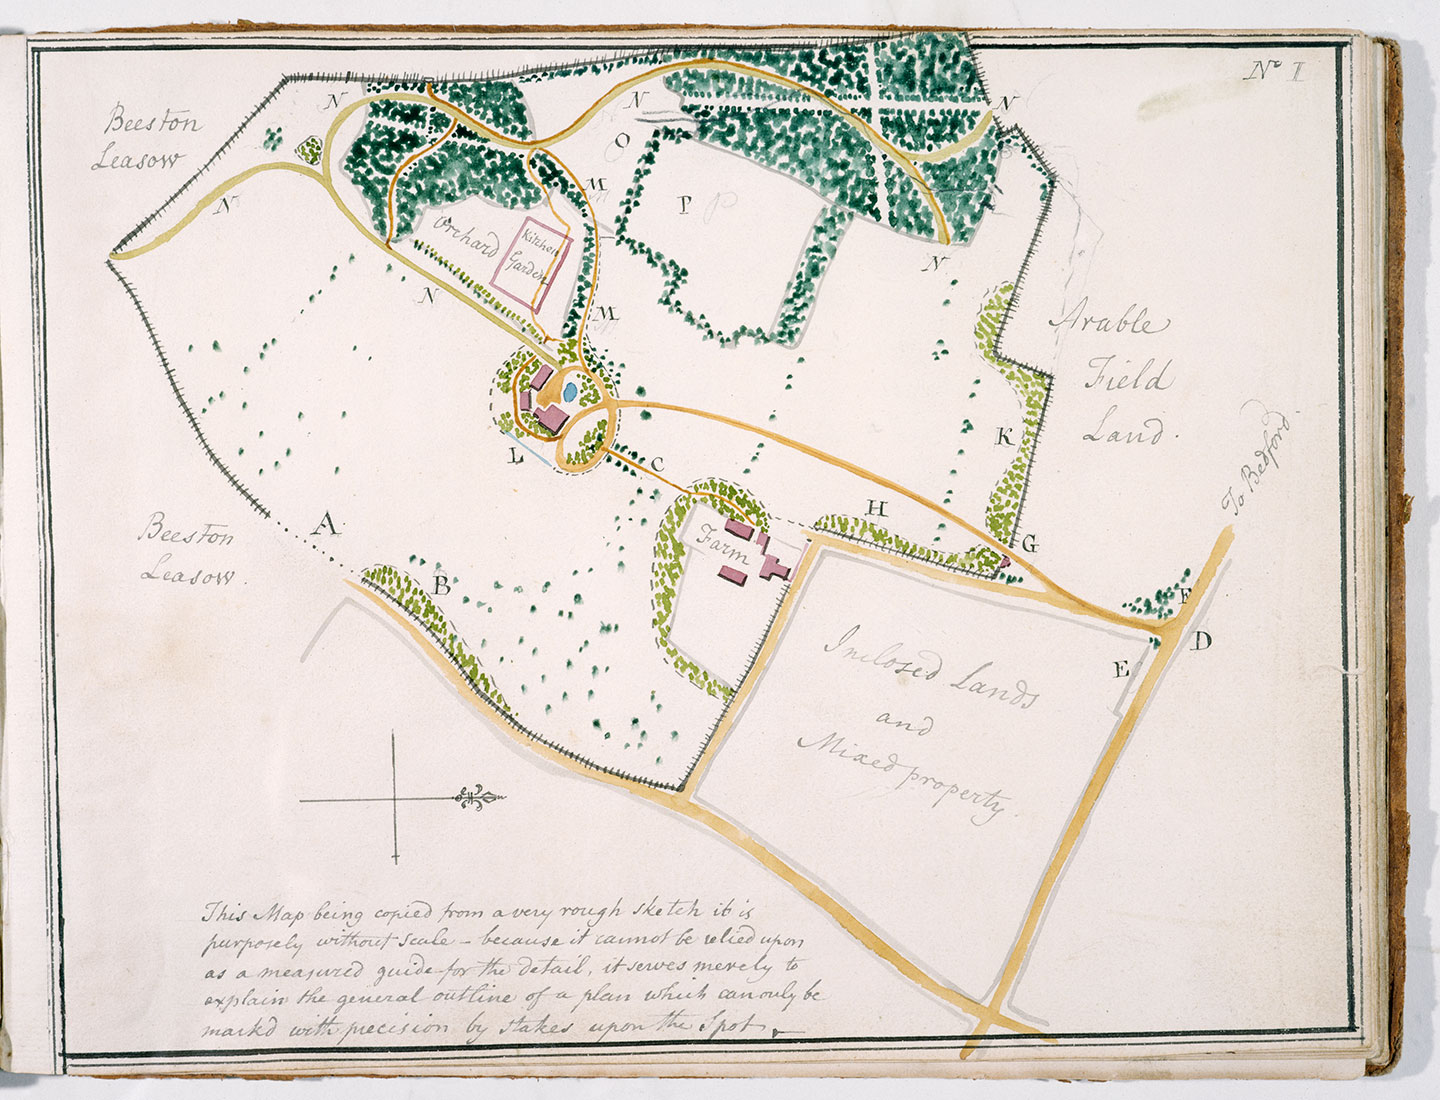 A photographic reproduction of a map of Moggerhanger Park